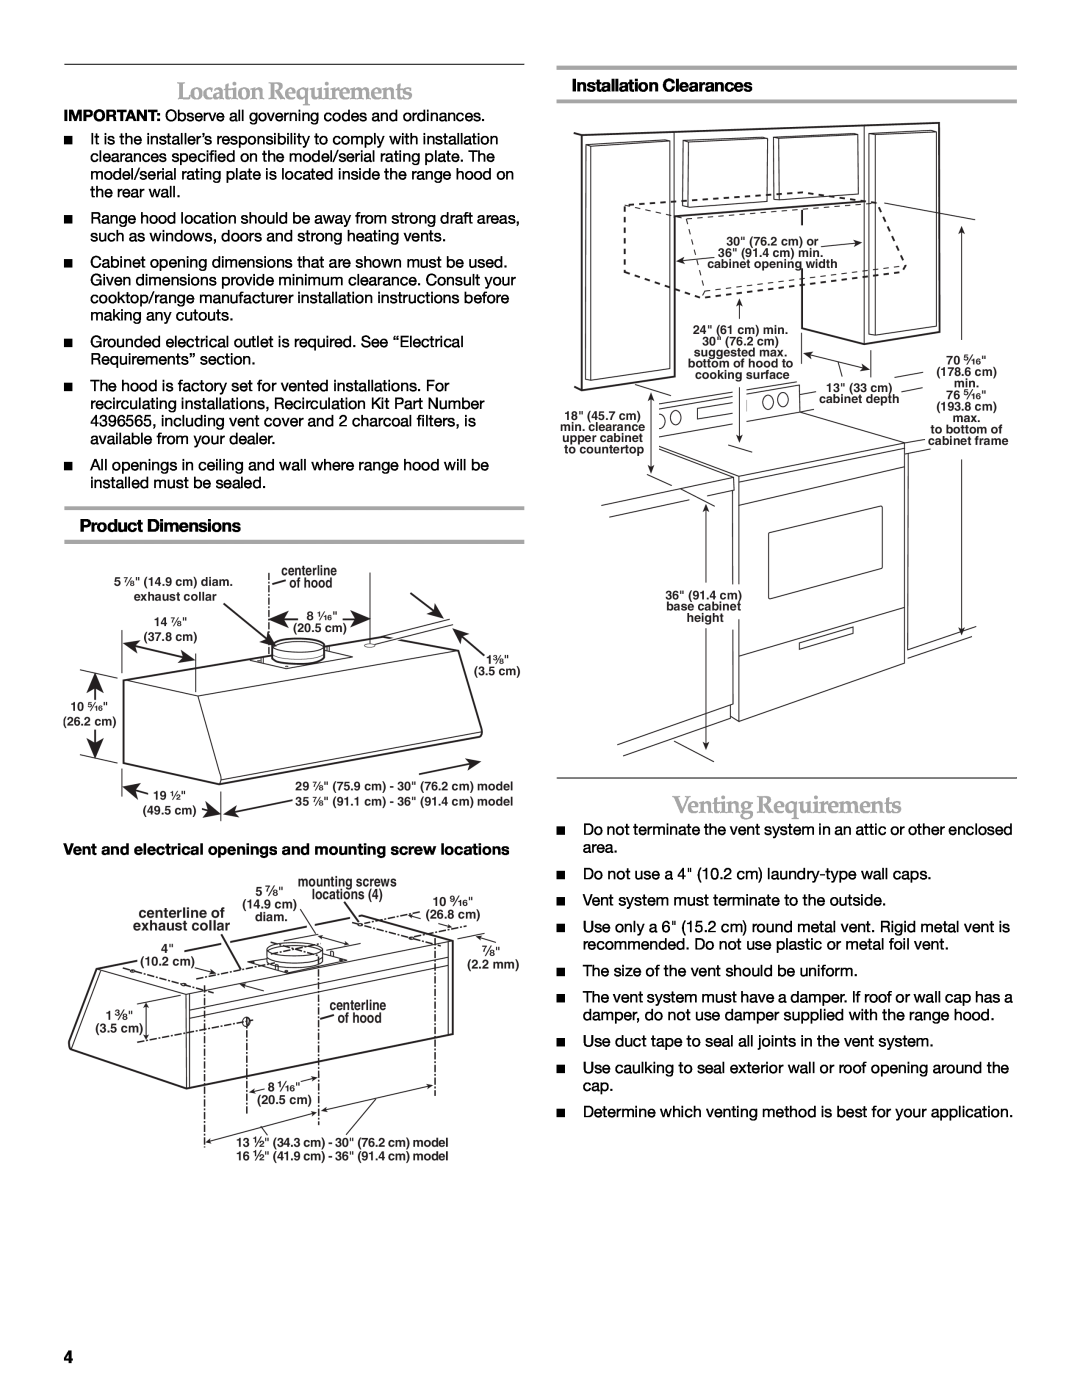 KitchenAid 2005 Location Requirements, Venting Requirements, Installation Clearances, Product Dimensions 